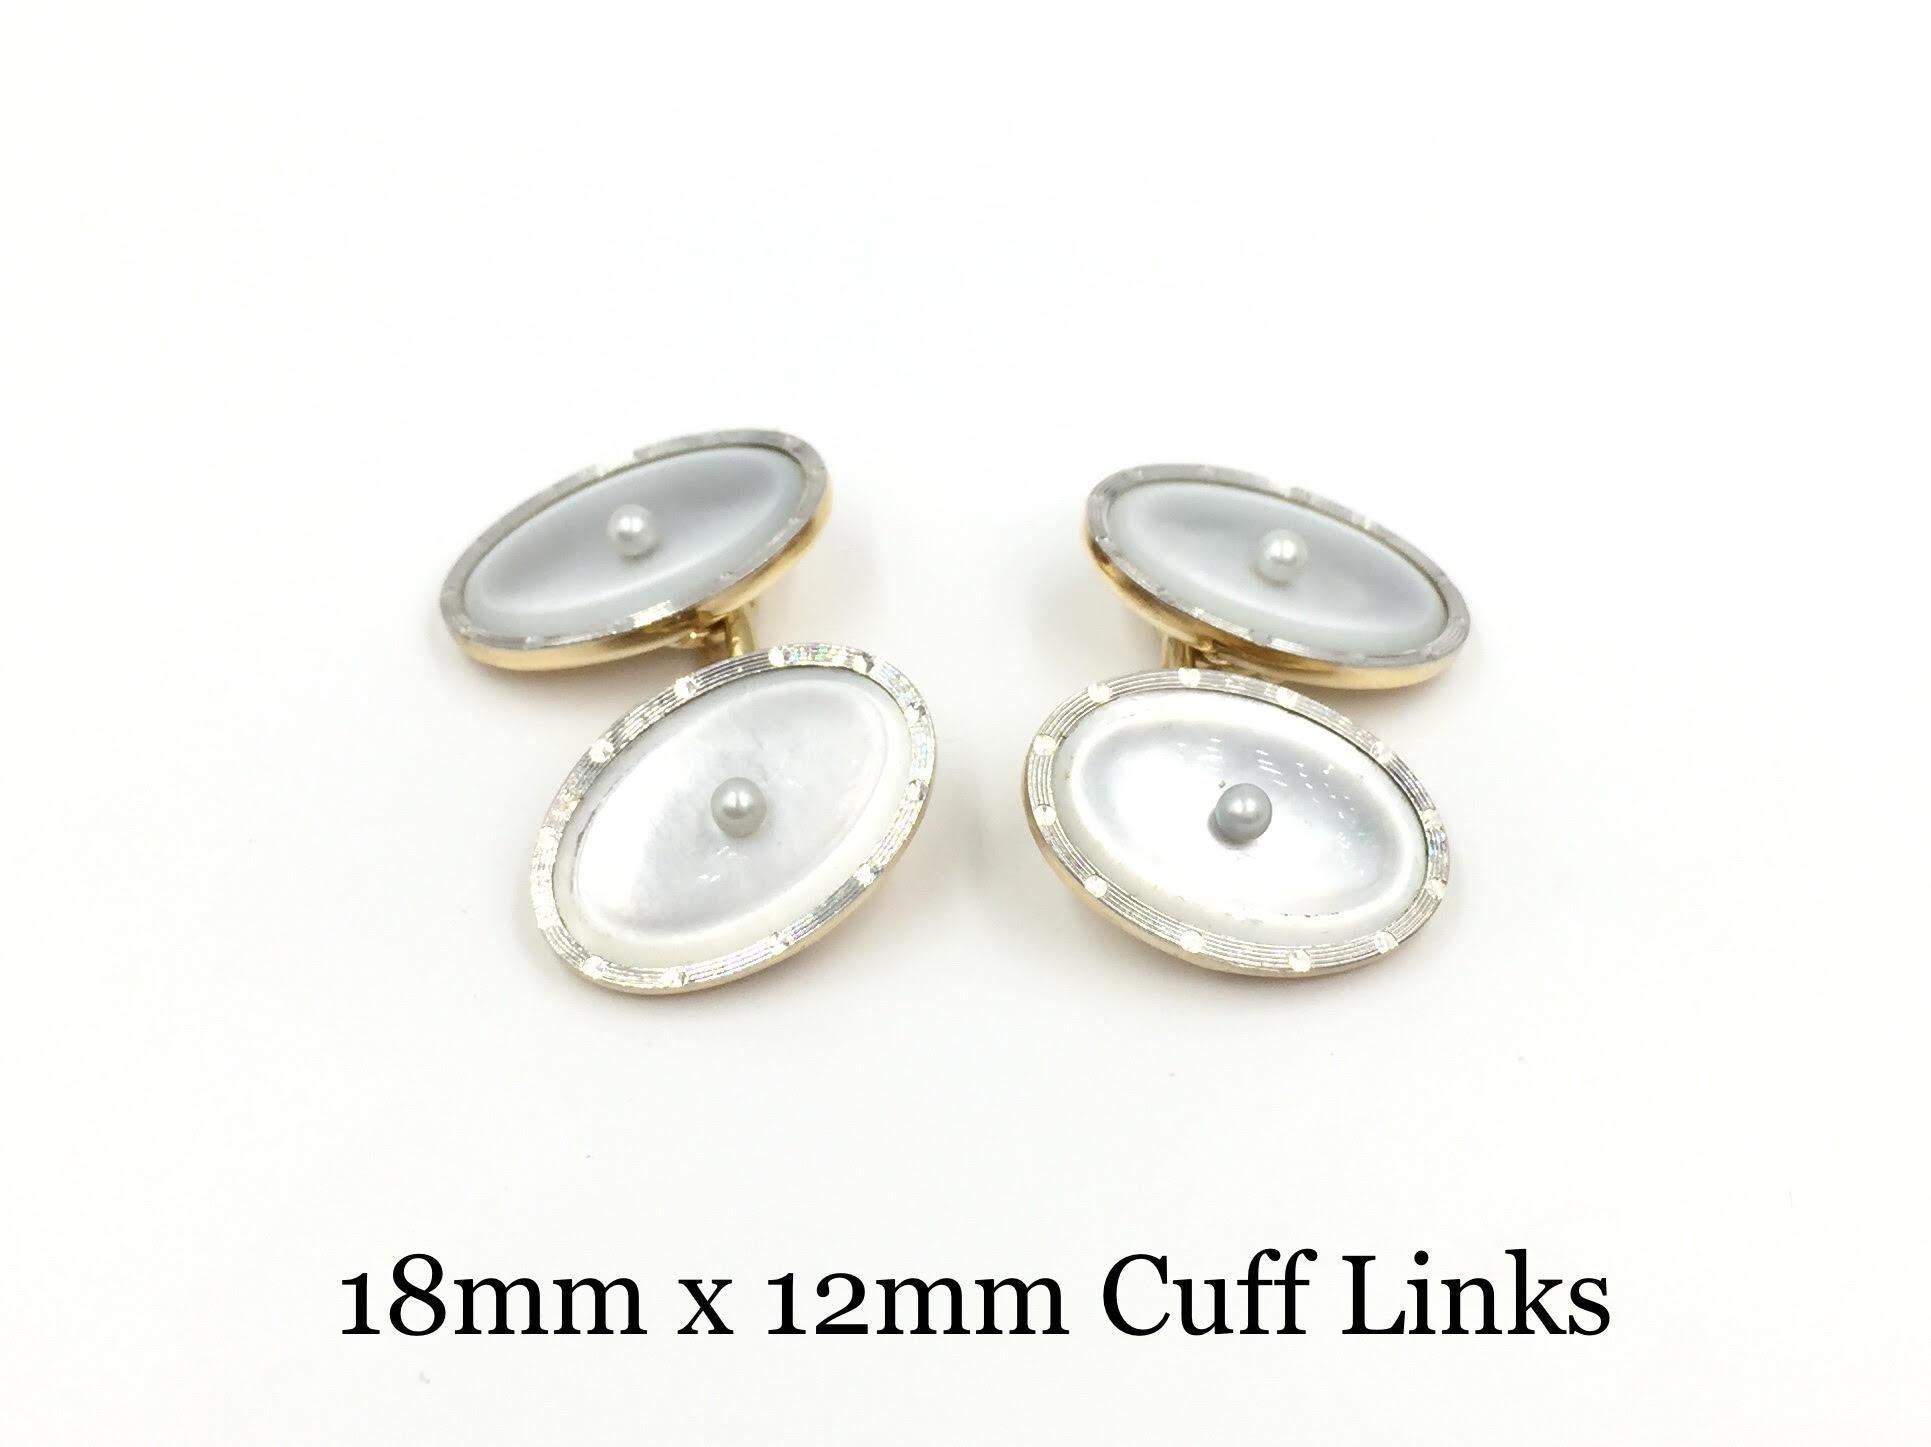 Circa 1930's vintage mother of pearl and two tone gold cuff link set. Set includes two different sized round shirt studs, both in a set of three. Beautiful oval gold linked cuff links as well as two mother of pearl collar studs. One small seed pearl